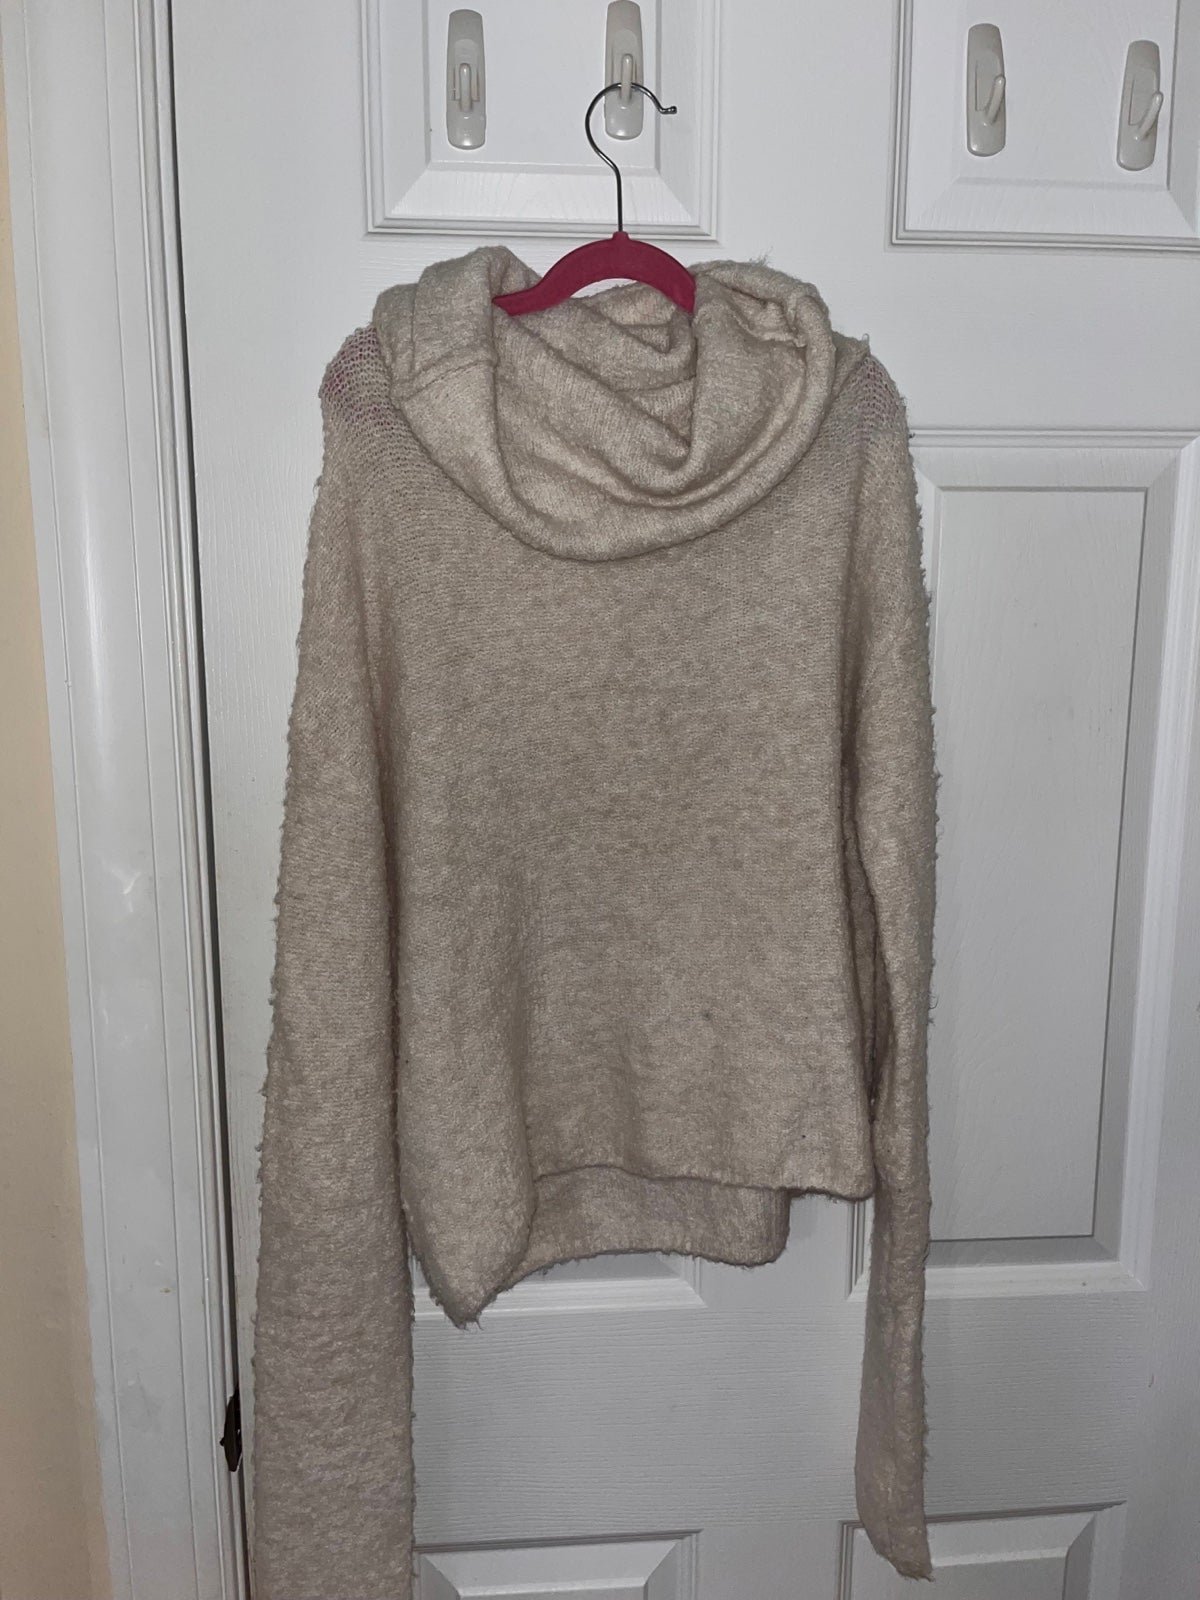 Buy Free people sweater irM3XKJff US Outlet